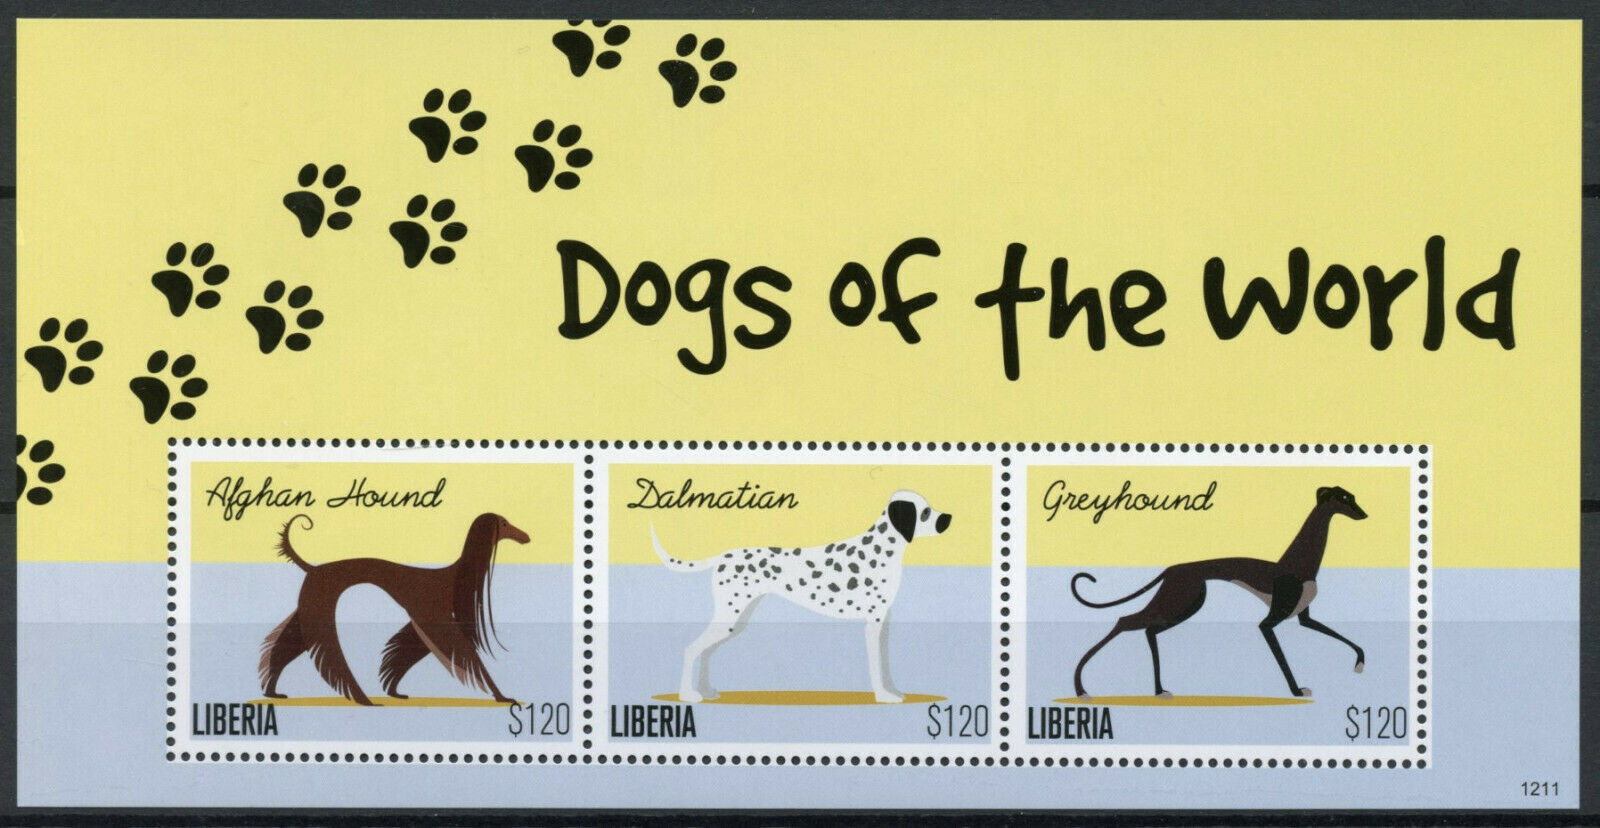 Liberia Stamps 2012 MNH Dogs of World Dalmatian Greyhound Afghan Hound 3v M/S II